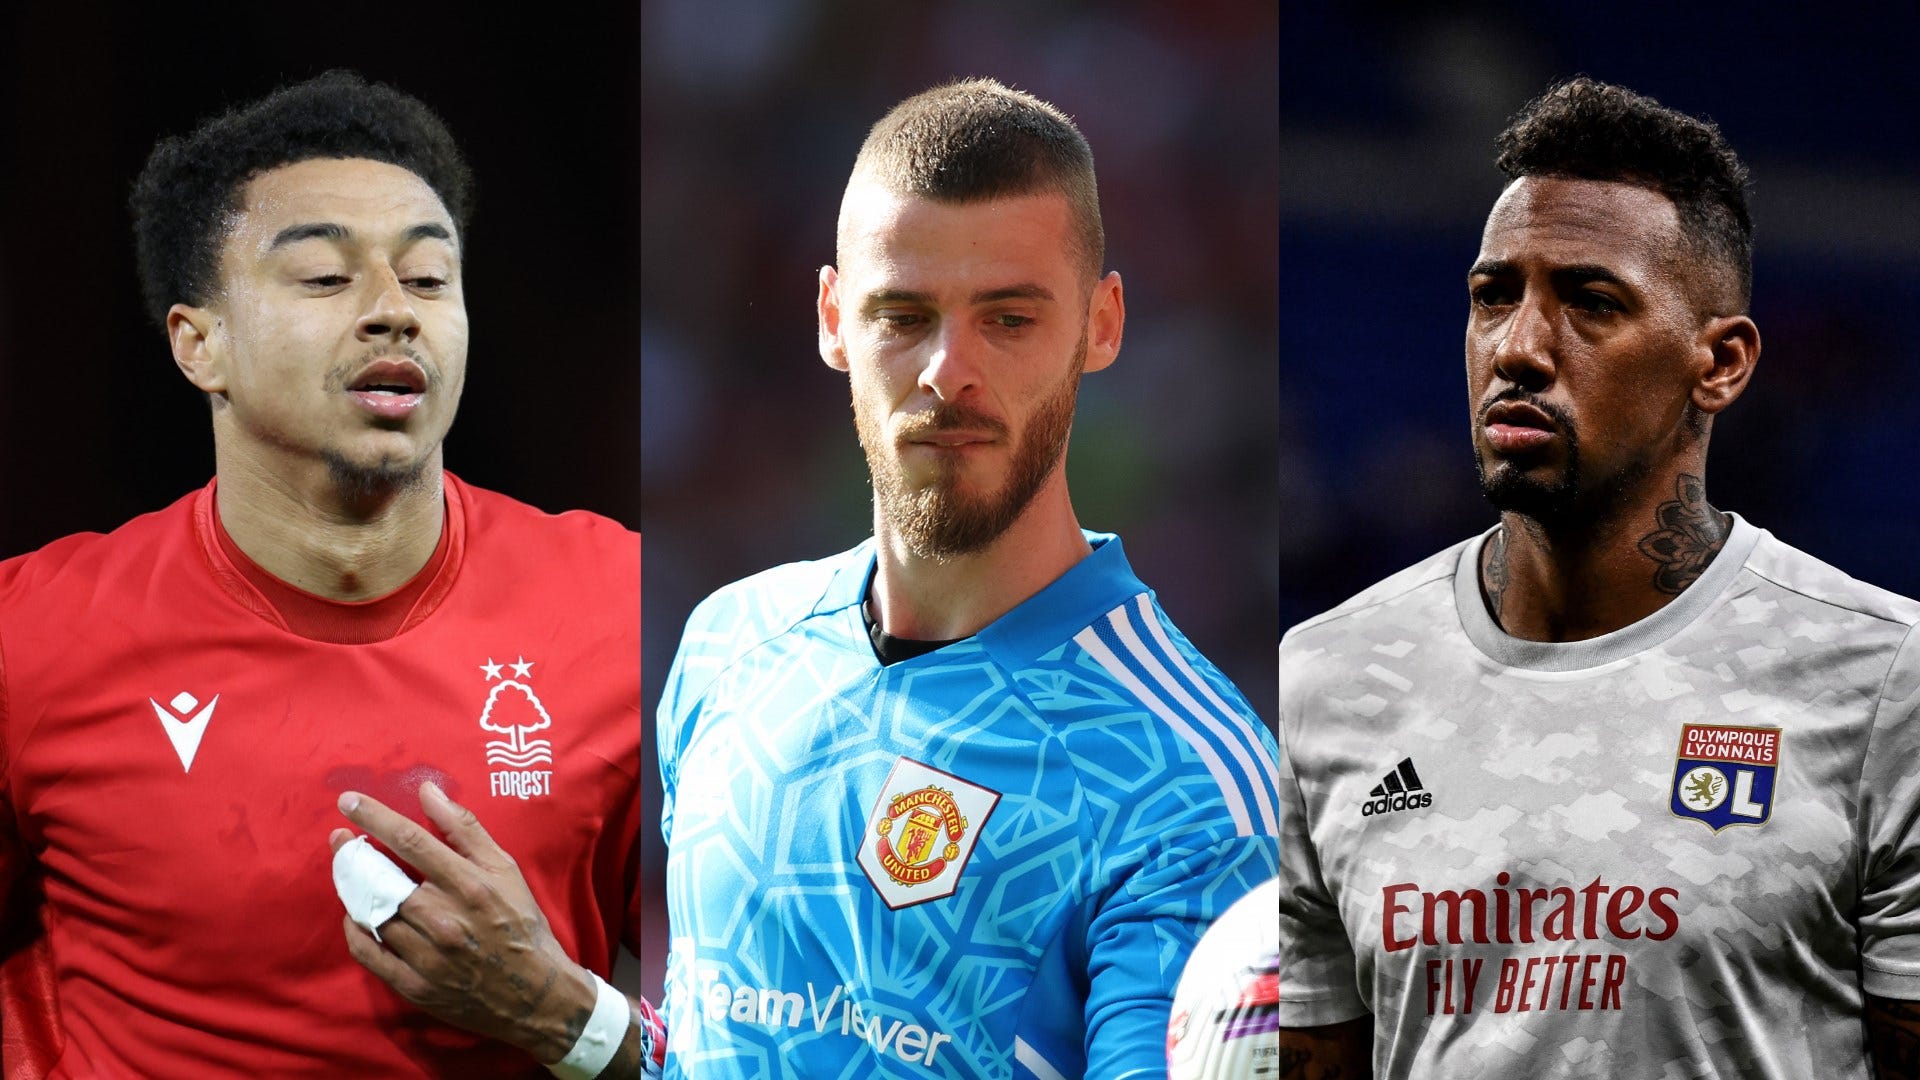 FM24: Best Free Agents To Watch Out For, FM Blog